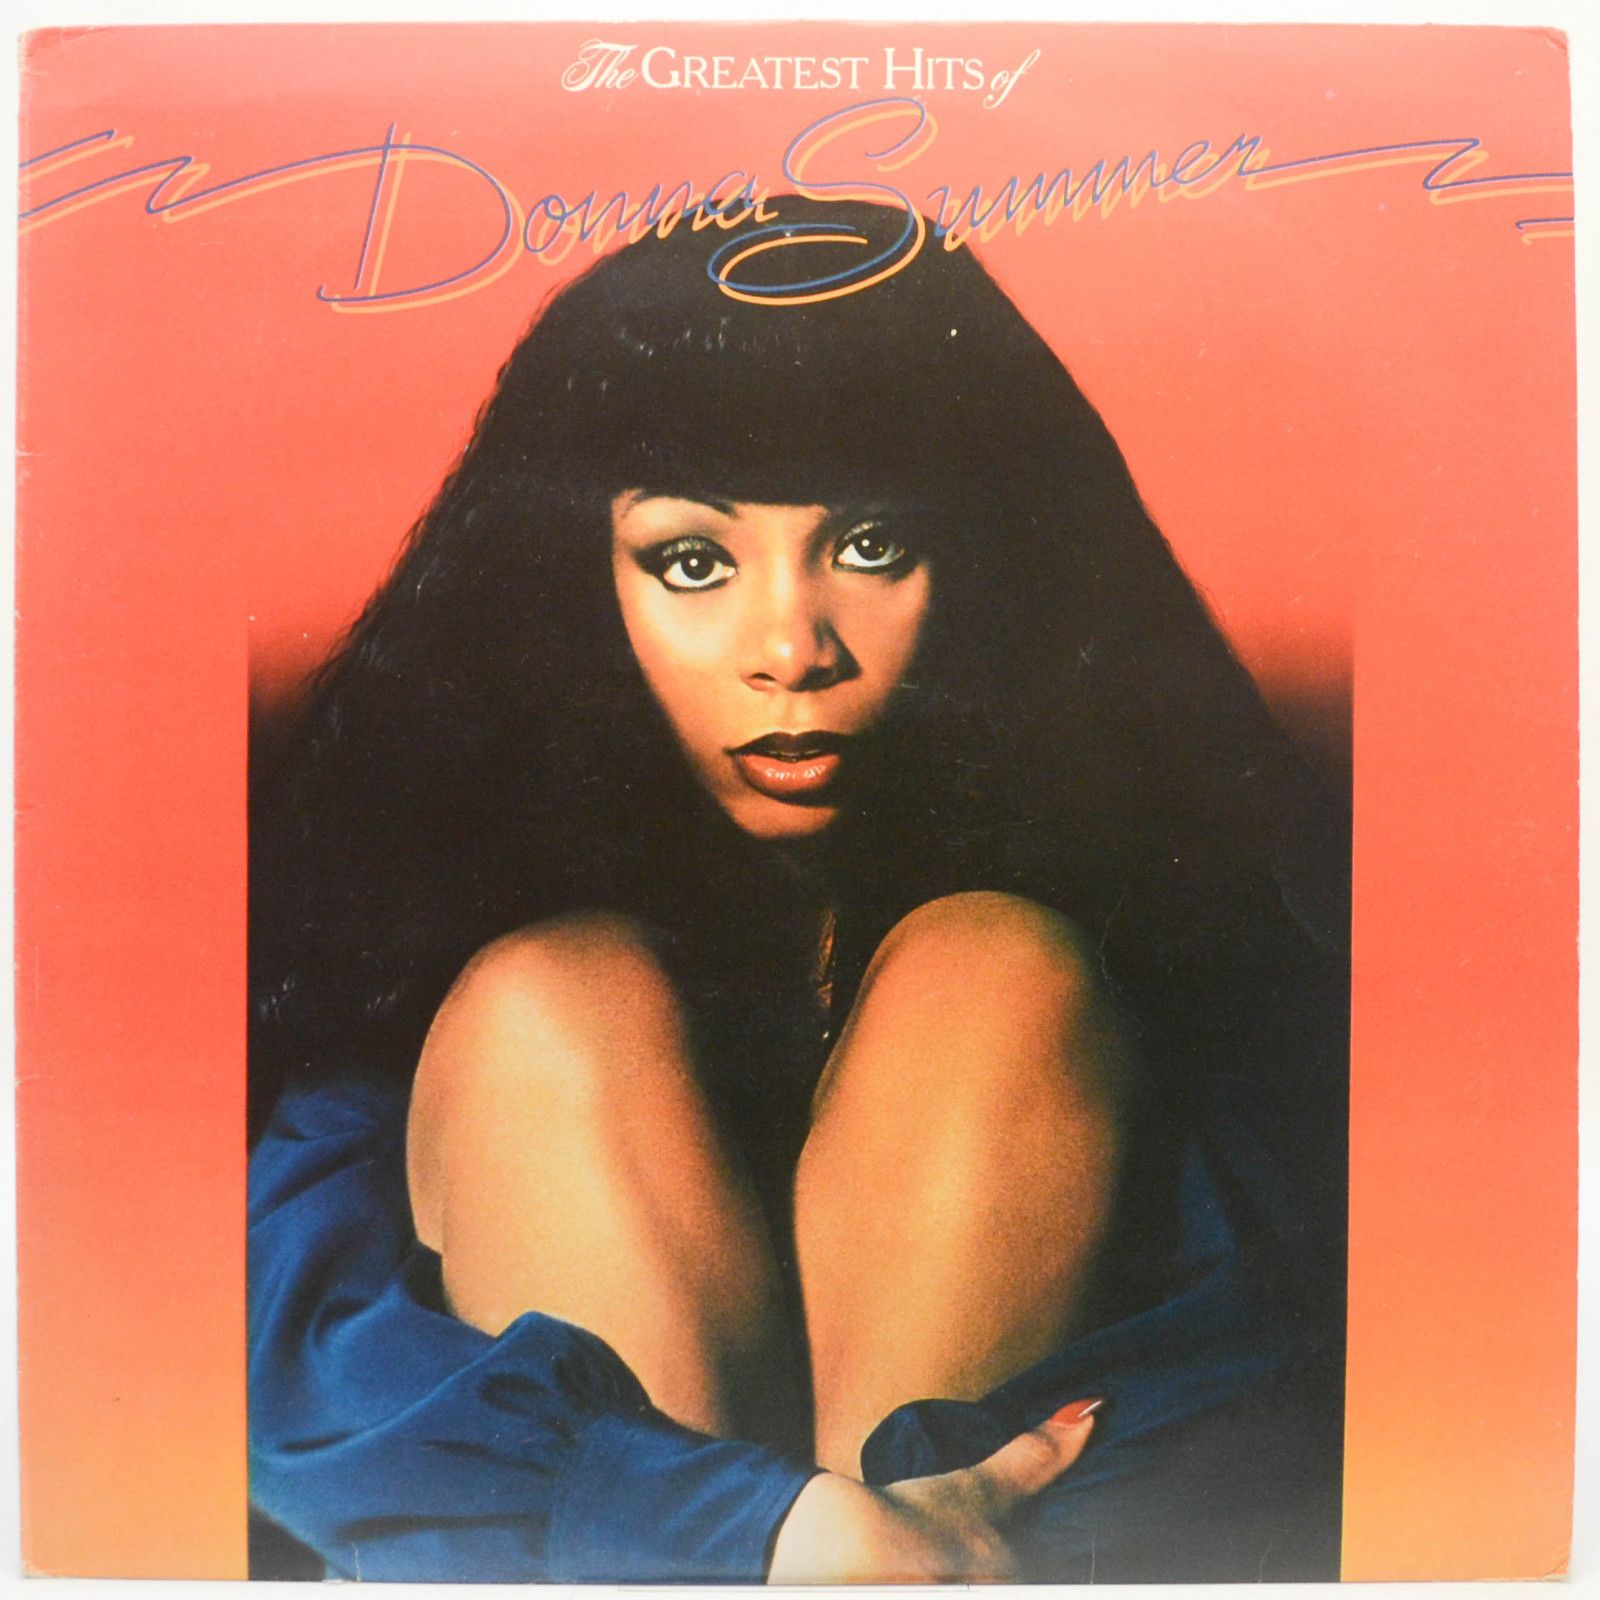 Donna Summer — The Greatest Hits Of Donna Summer (UK), 1977